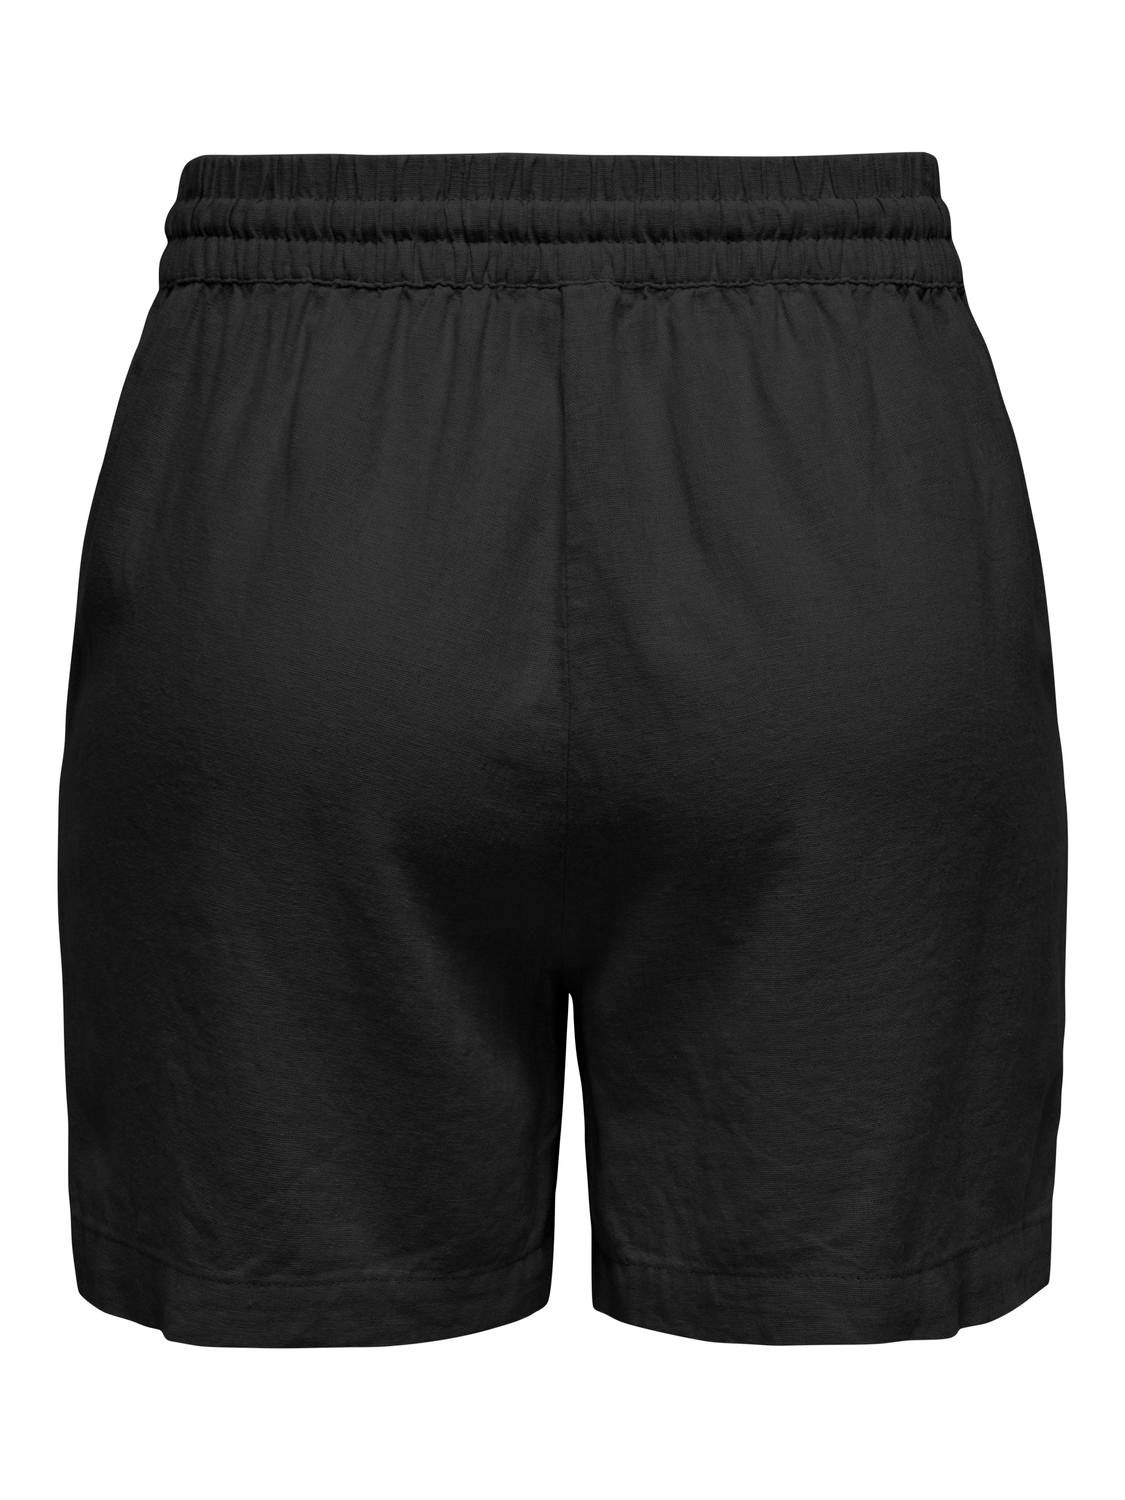 ONLY Normal geschnitten Hohe Taille Shorts -Black - 15321518